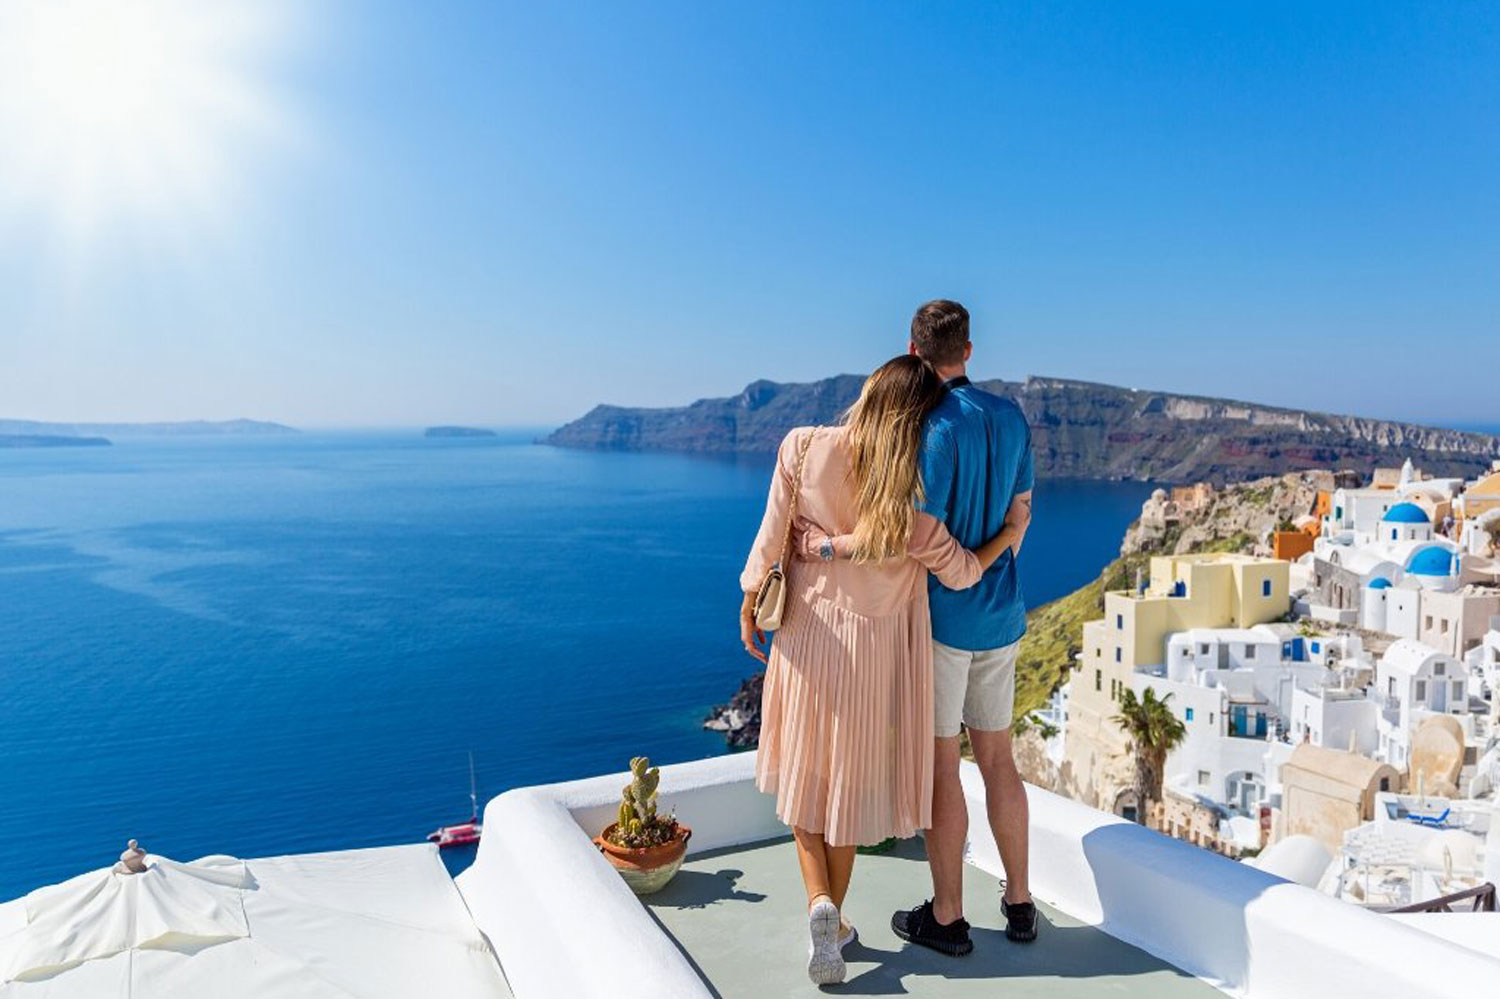 American Woman's Awkward 'Greek Vacation' Dilemma Shows Why The US Is Not Ready For Polyamory